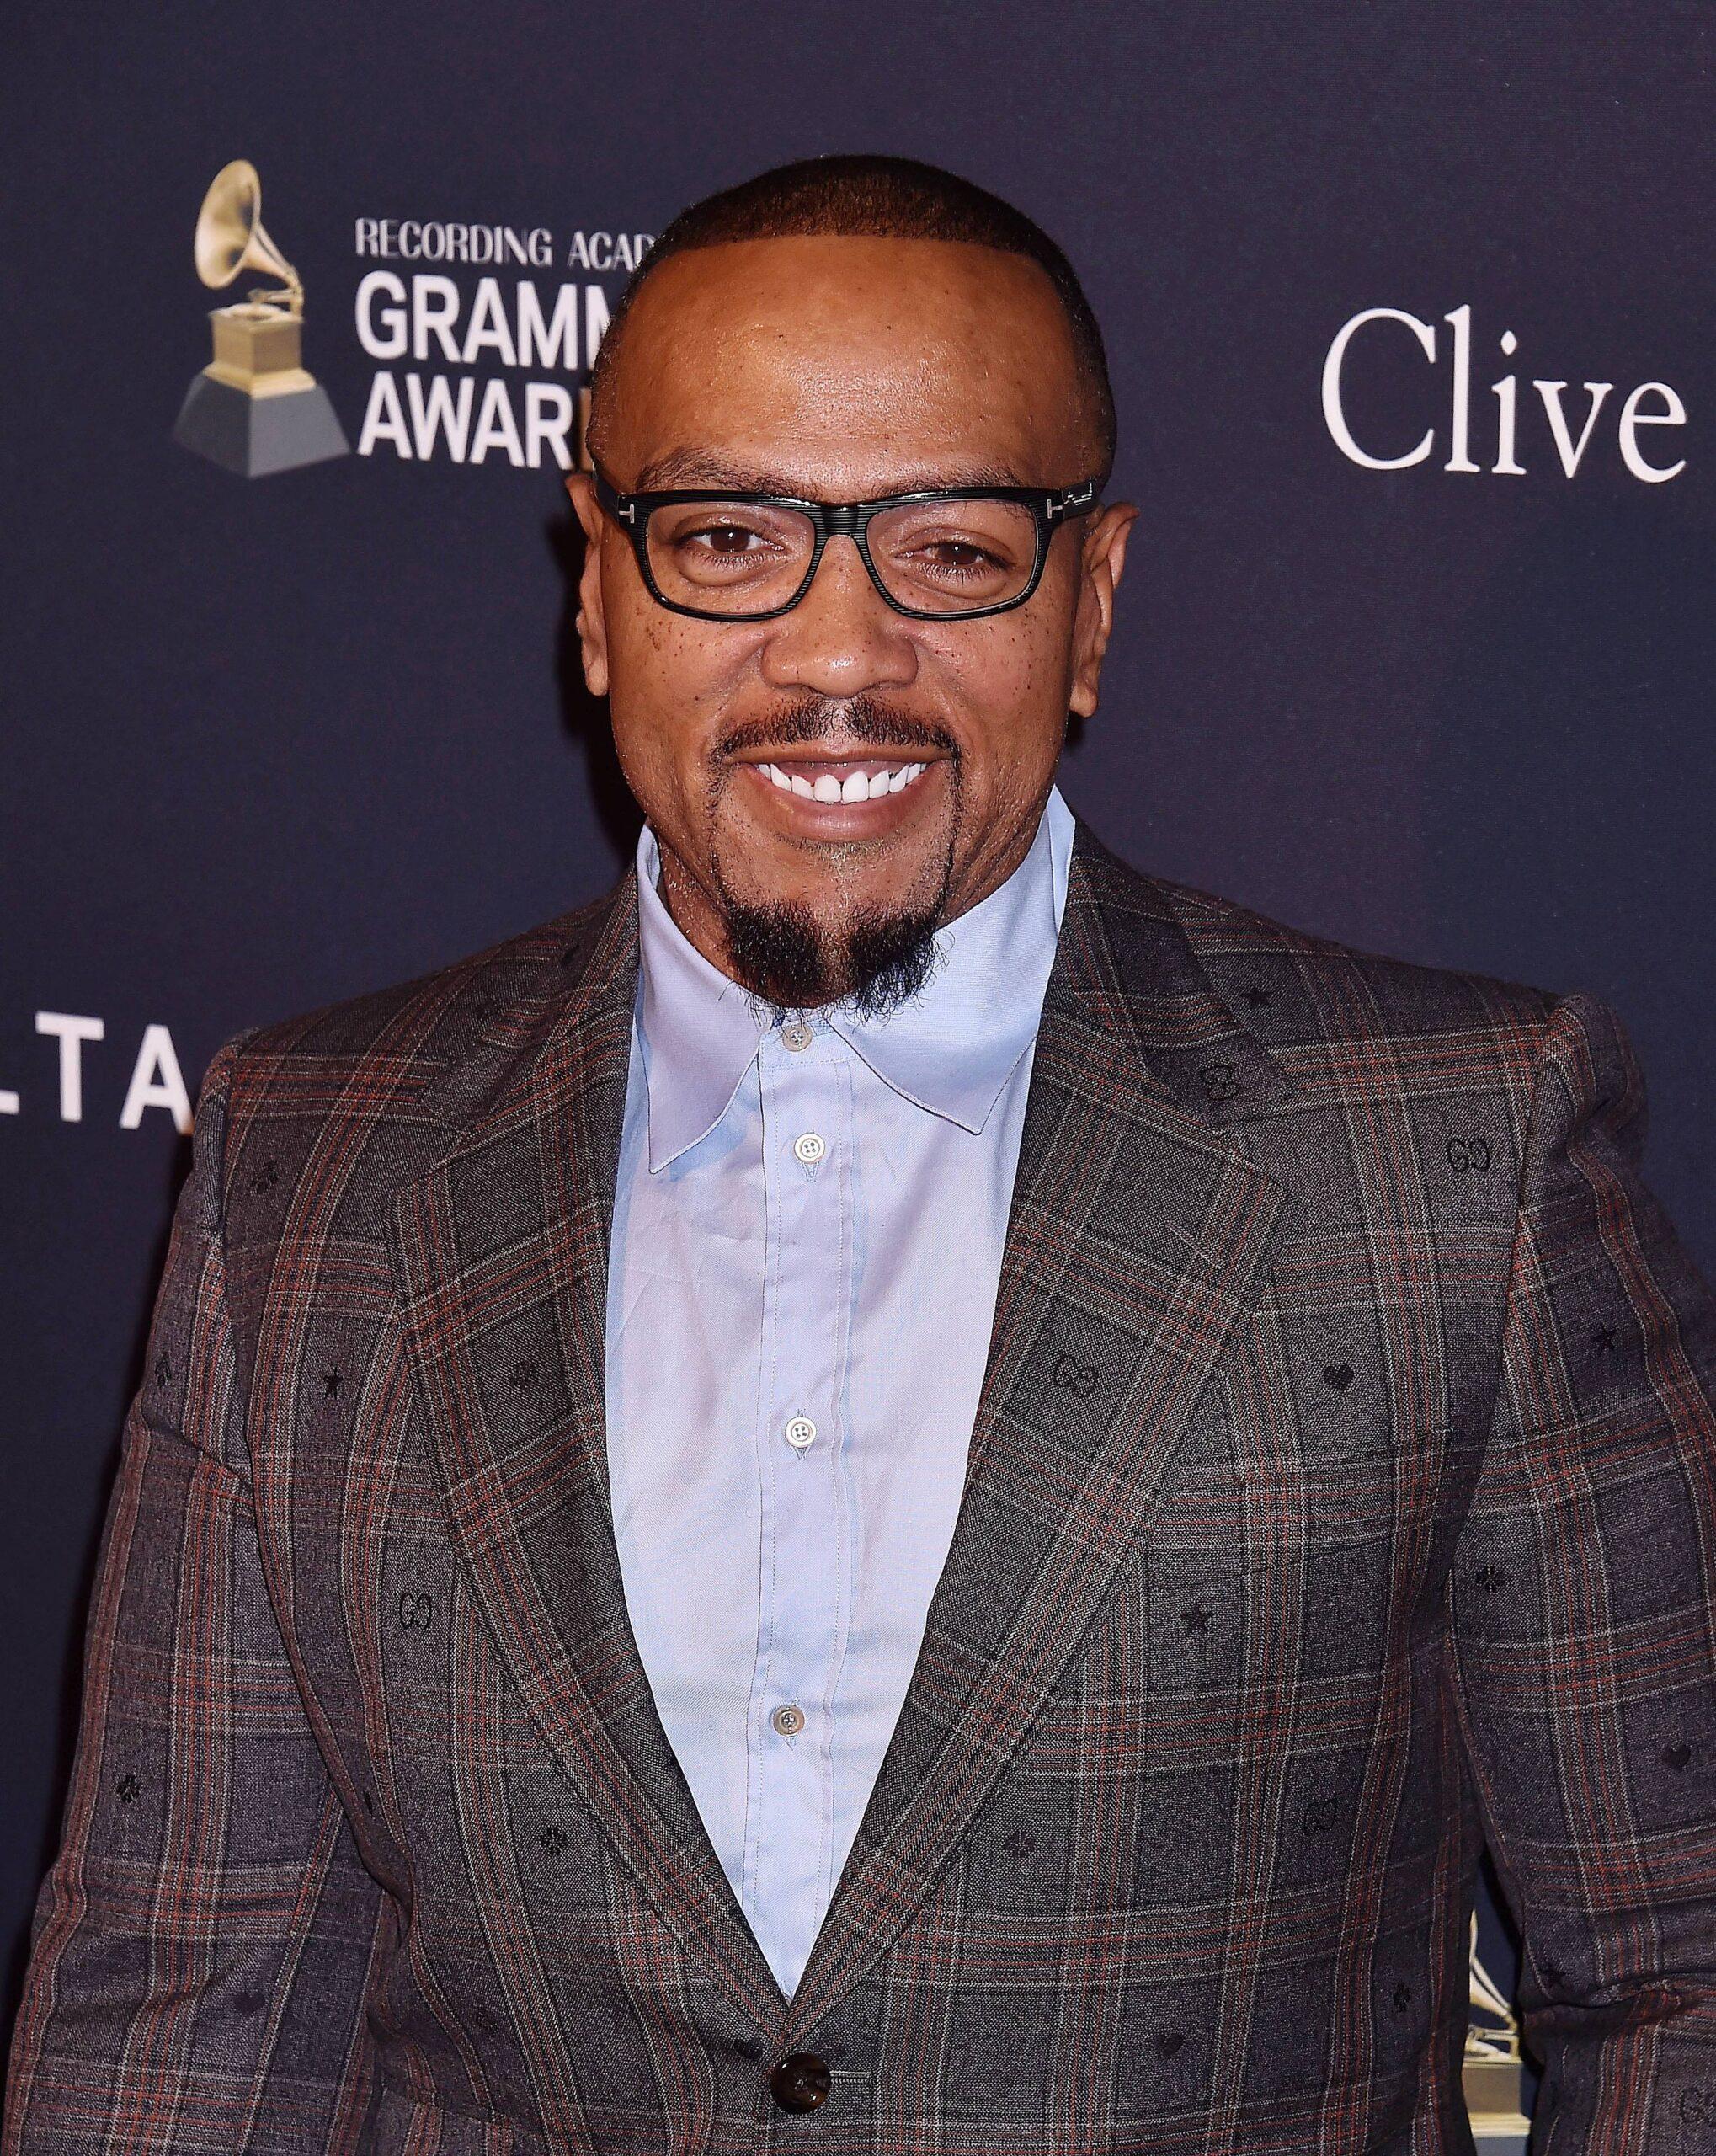 Timbaland attends the Pre-Grammy Gala and Grammy Salute to Industry Icons Honoring Sean "Diddy" Combs